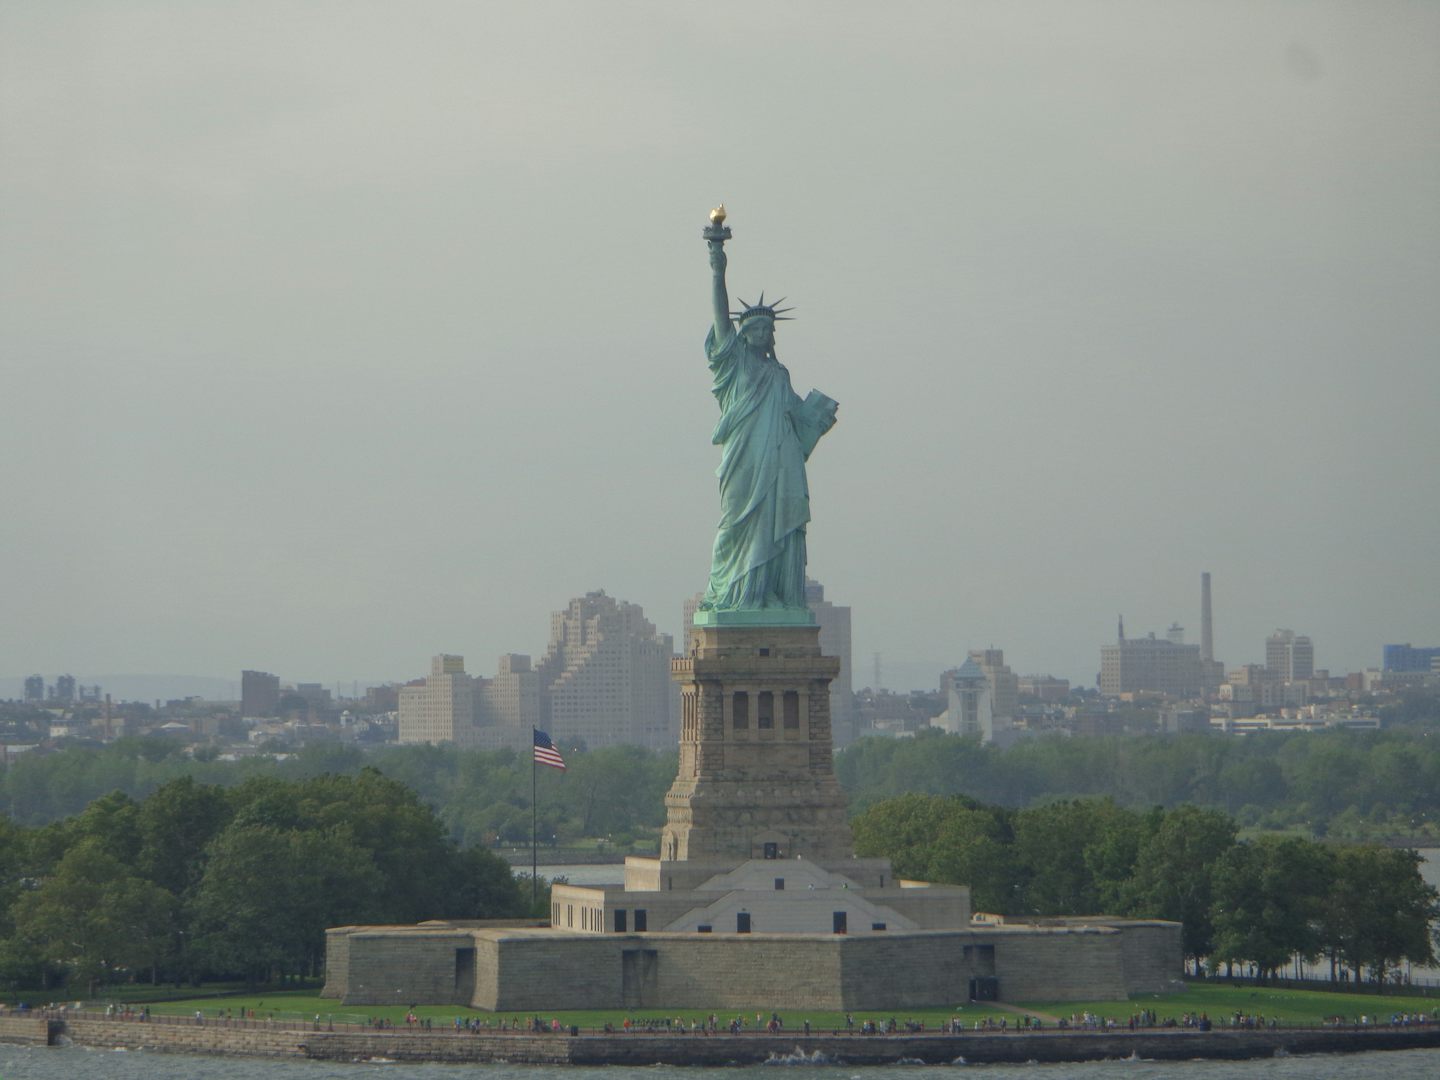 Leaving NYC.  This was taken on the ship. Always so wonderful to see Lady Liberty.